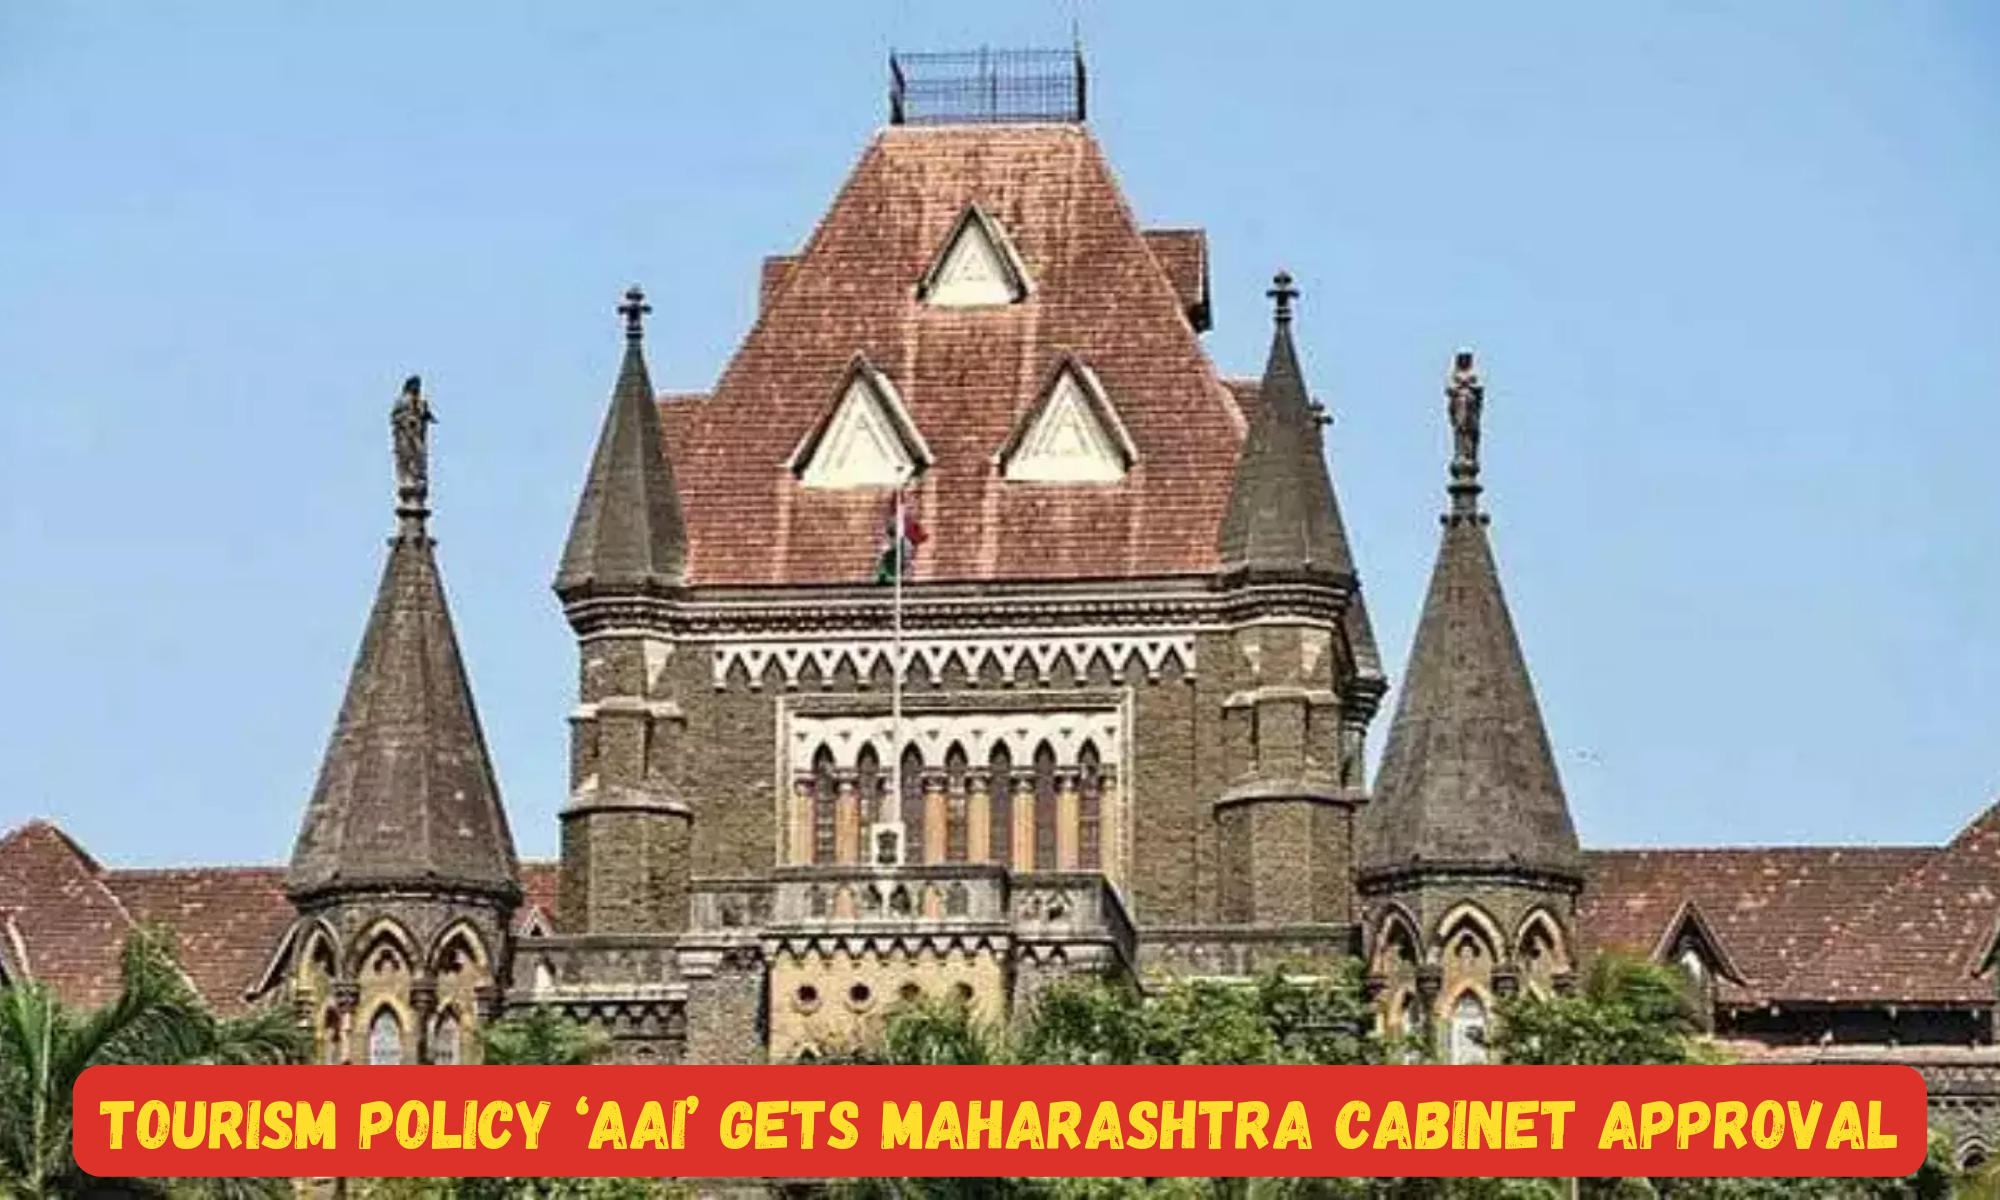 Gender-inclusive tourism policy ‘Aai’ gets Maharashtra cabinet approval